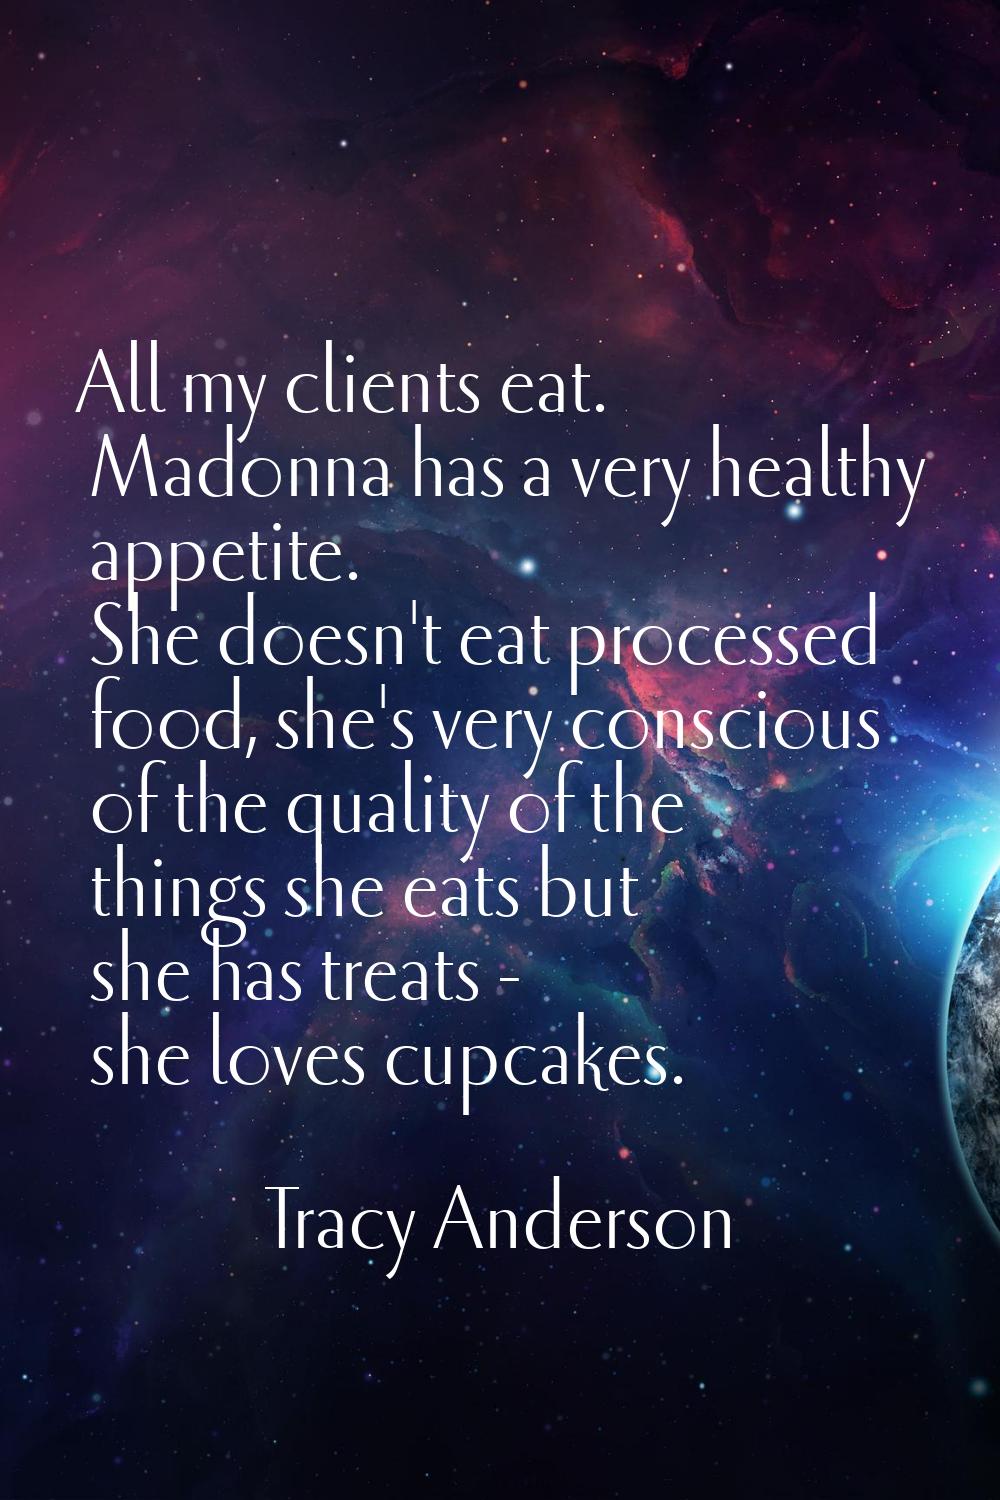 All my clients eat. Madonna has a very healthy appetite. She doesn't eat processed food, she's very